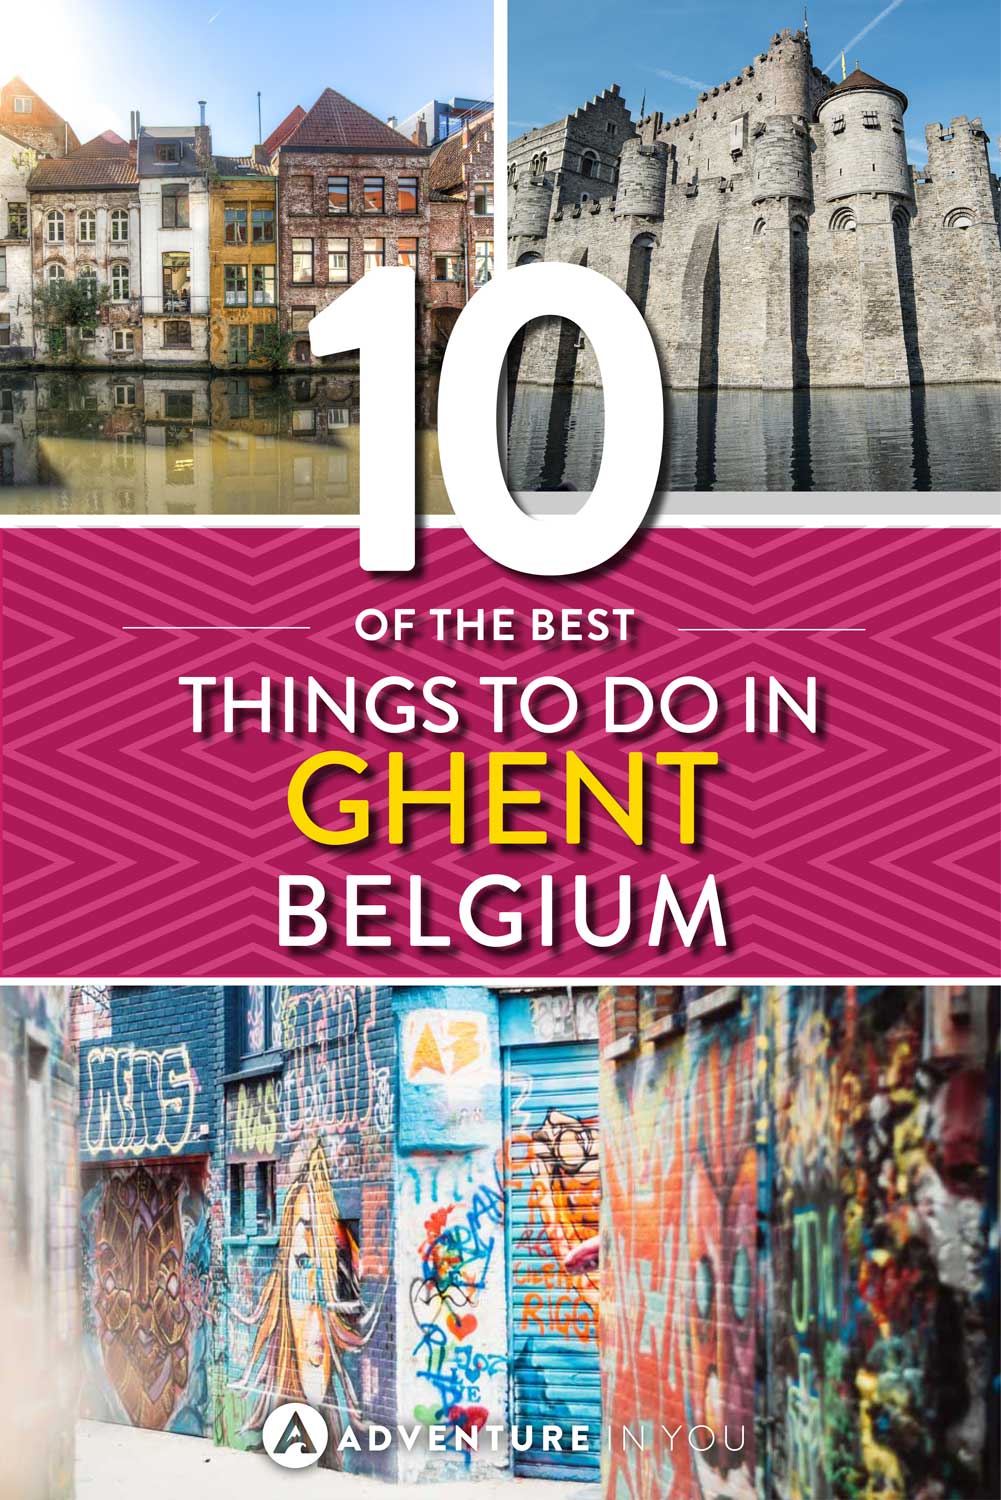 Ghent | Looking to go to Ghent, Belgium? Here are my top recommendations on the best things to do in the area. From the best restaurants and bars to the best street art, Ghent has a lot to offer visitors.